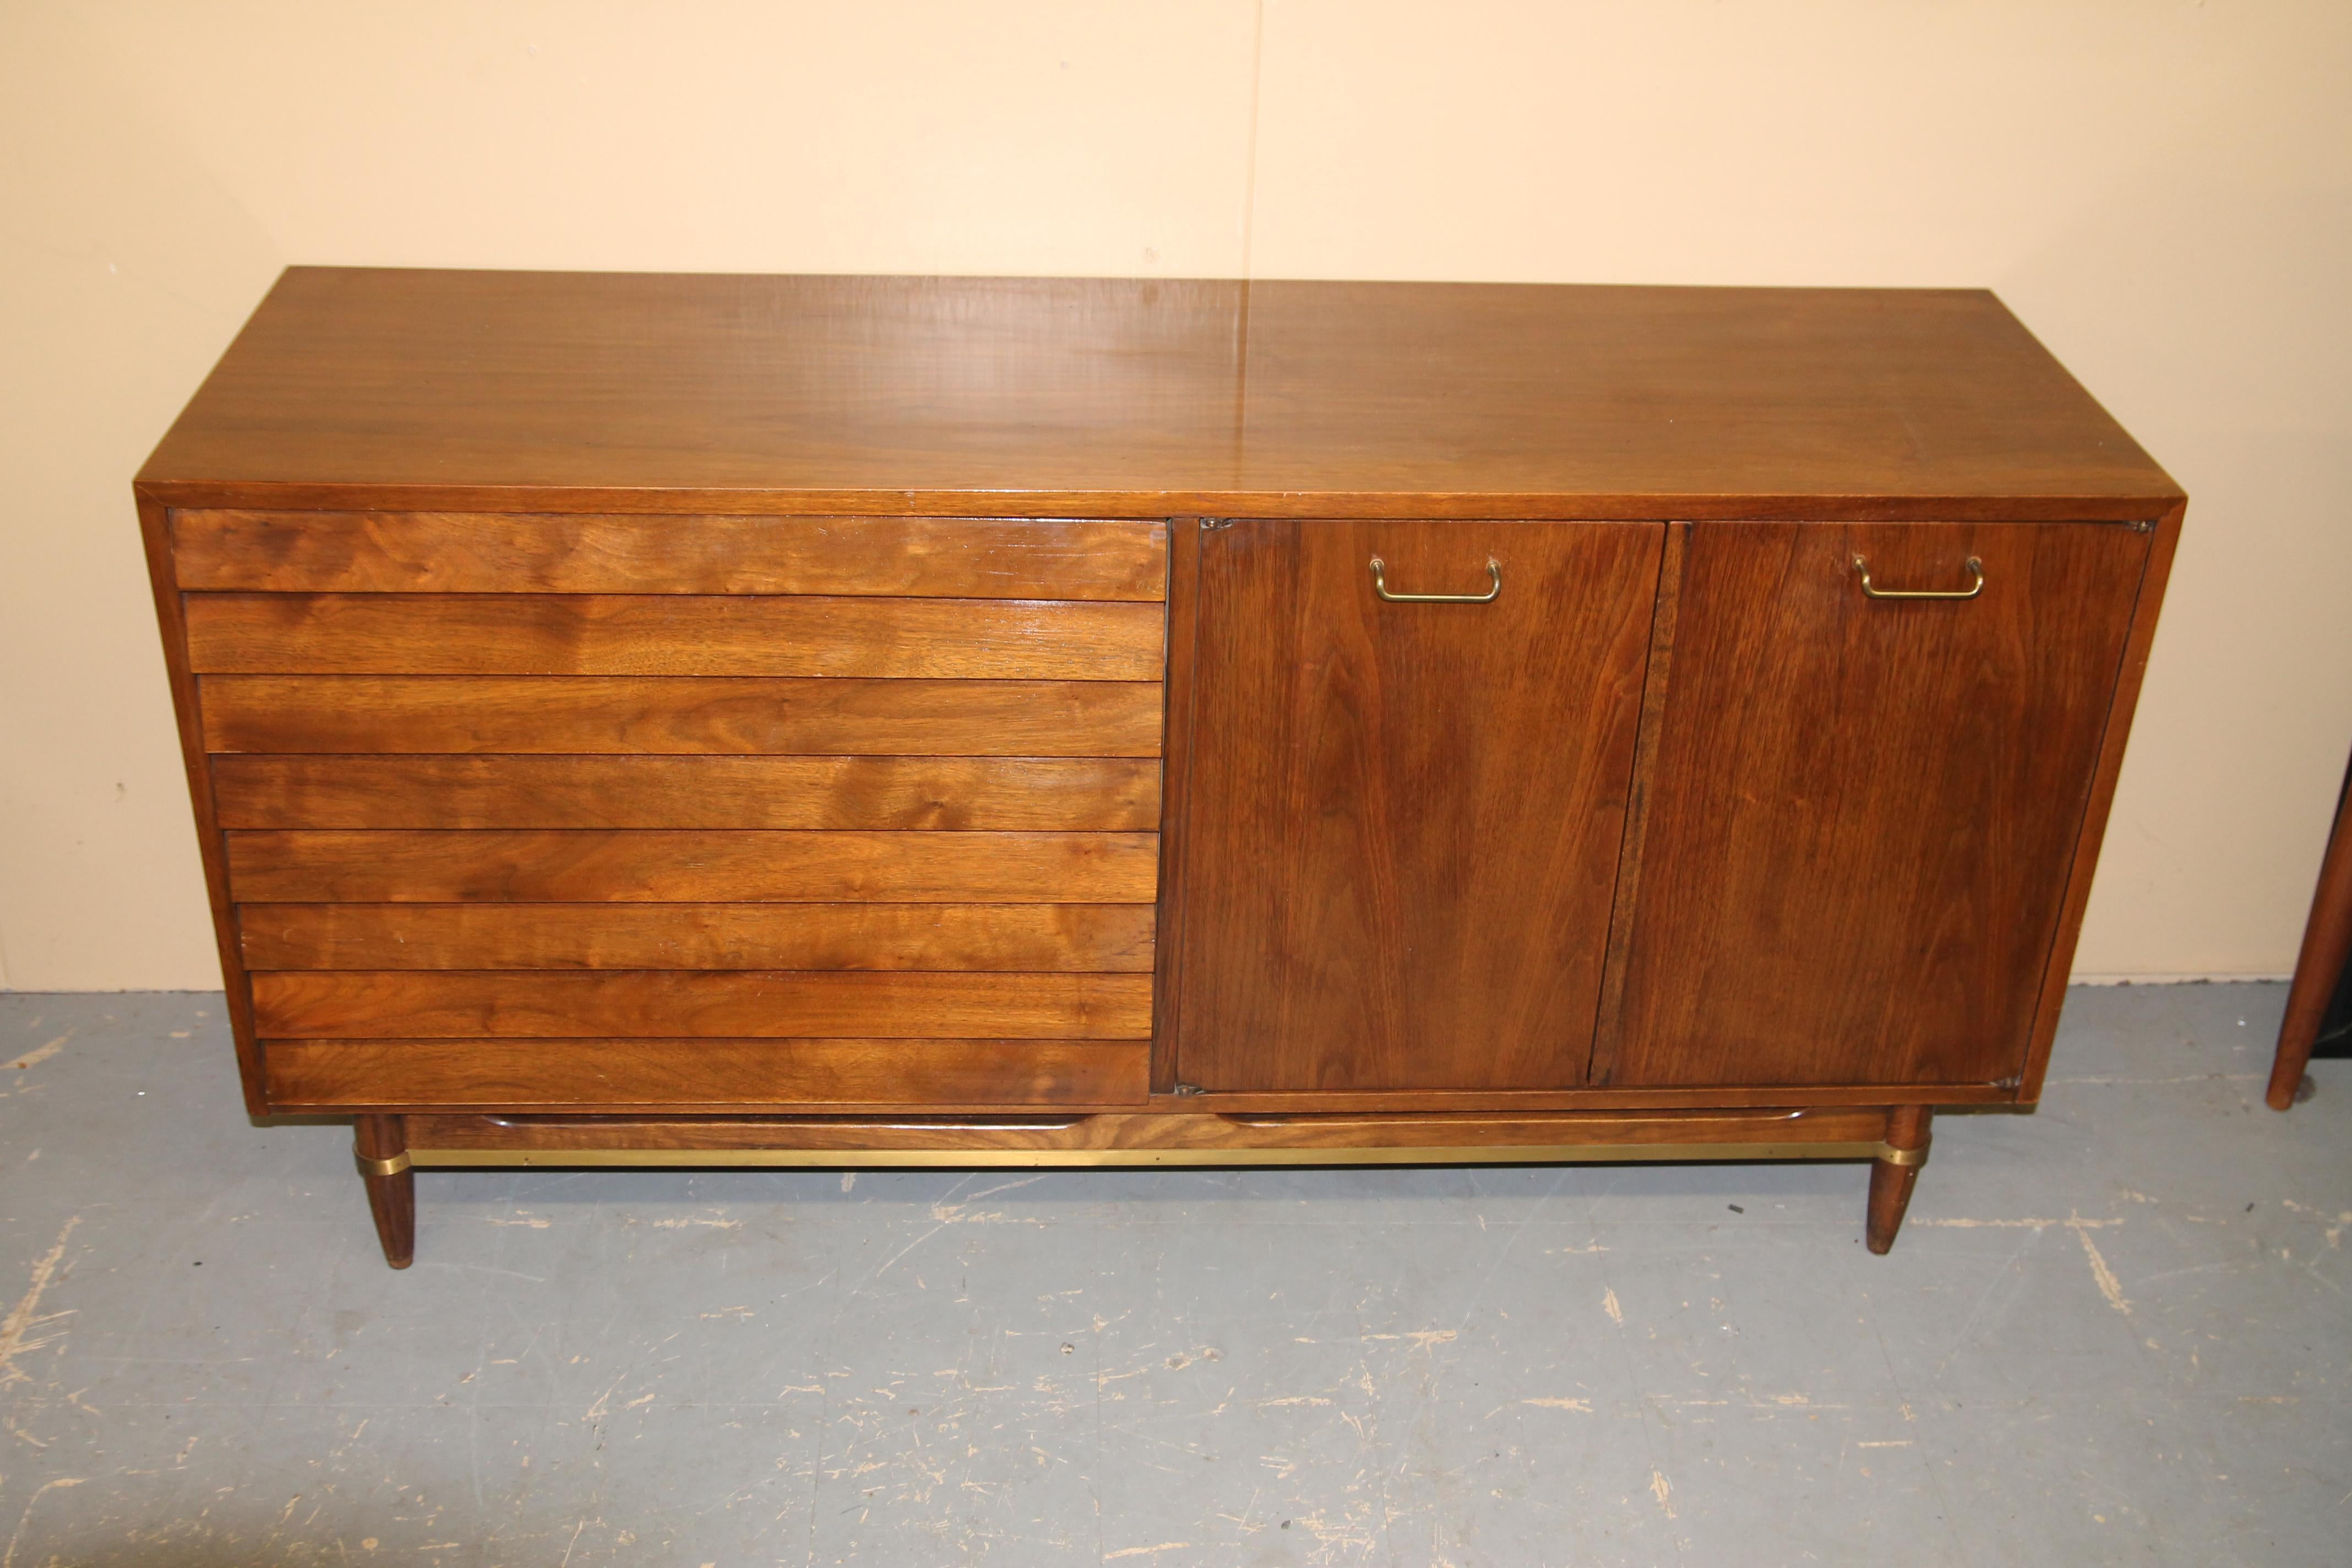 Nice credenza designed by Merton Gershun for American of Martinsville for the Dania collection. Nice walnut finish with great brass accent. Offers ample storage as seen in the photos.